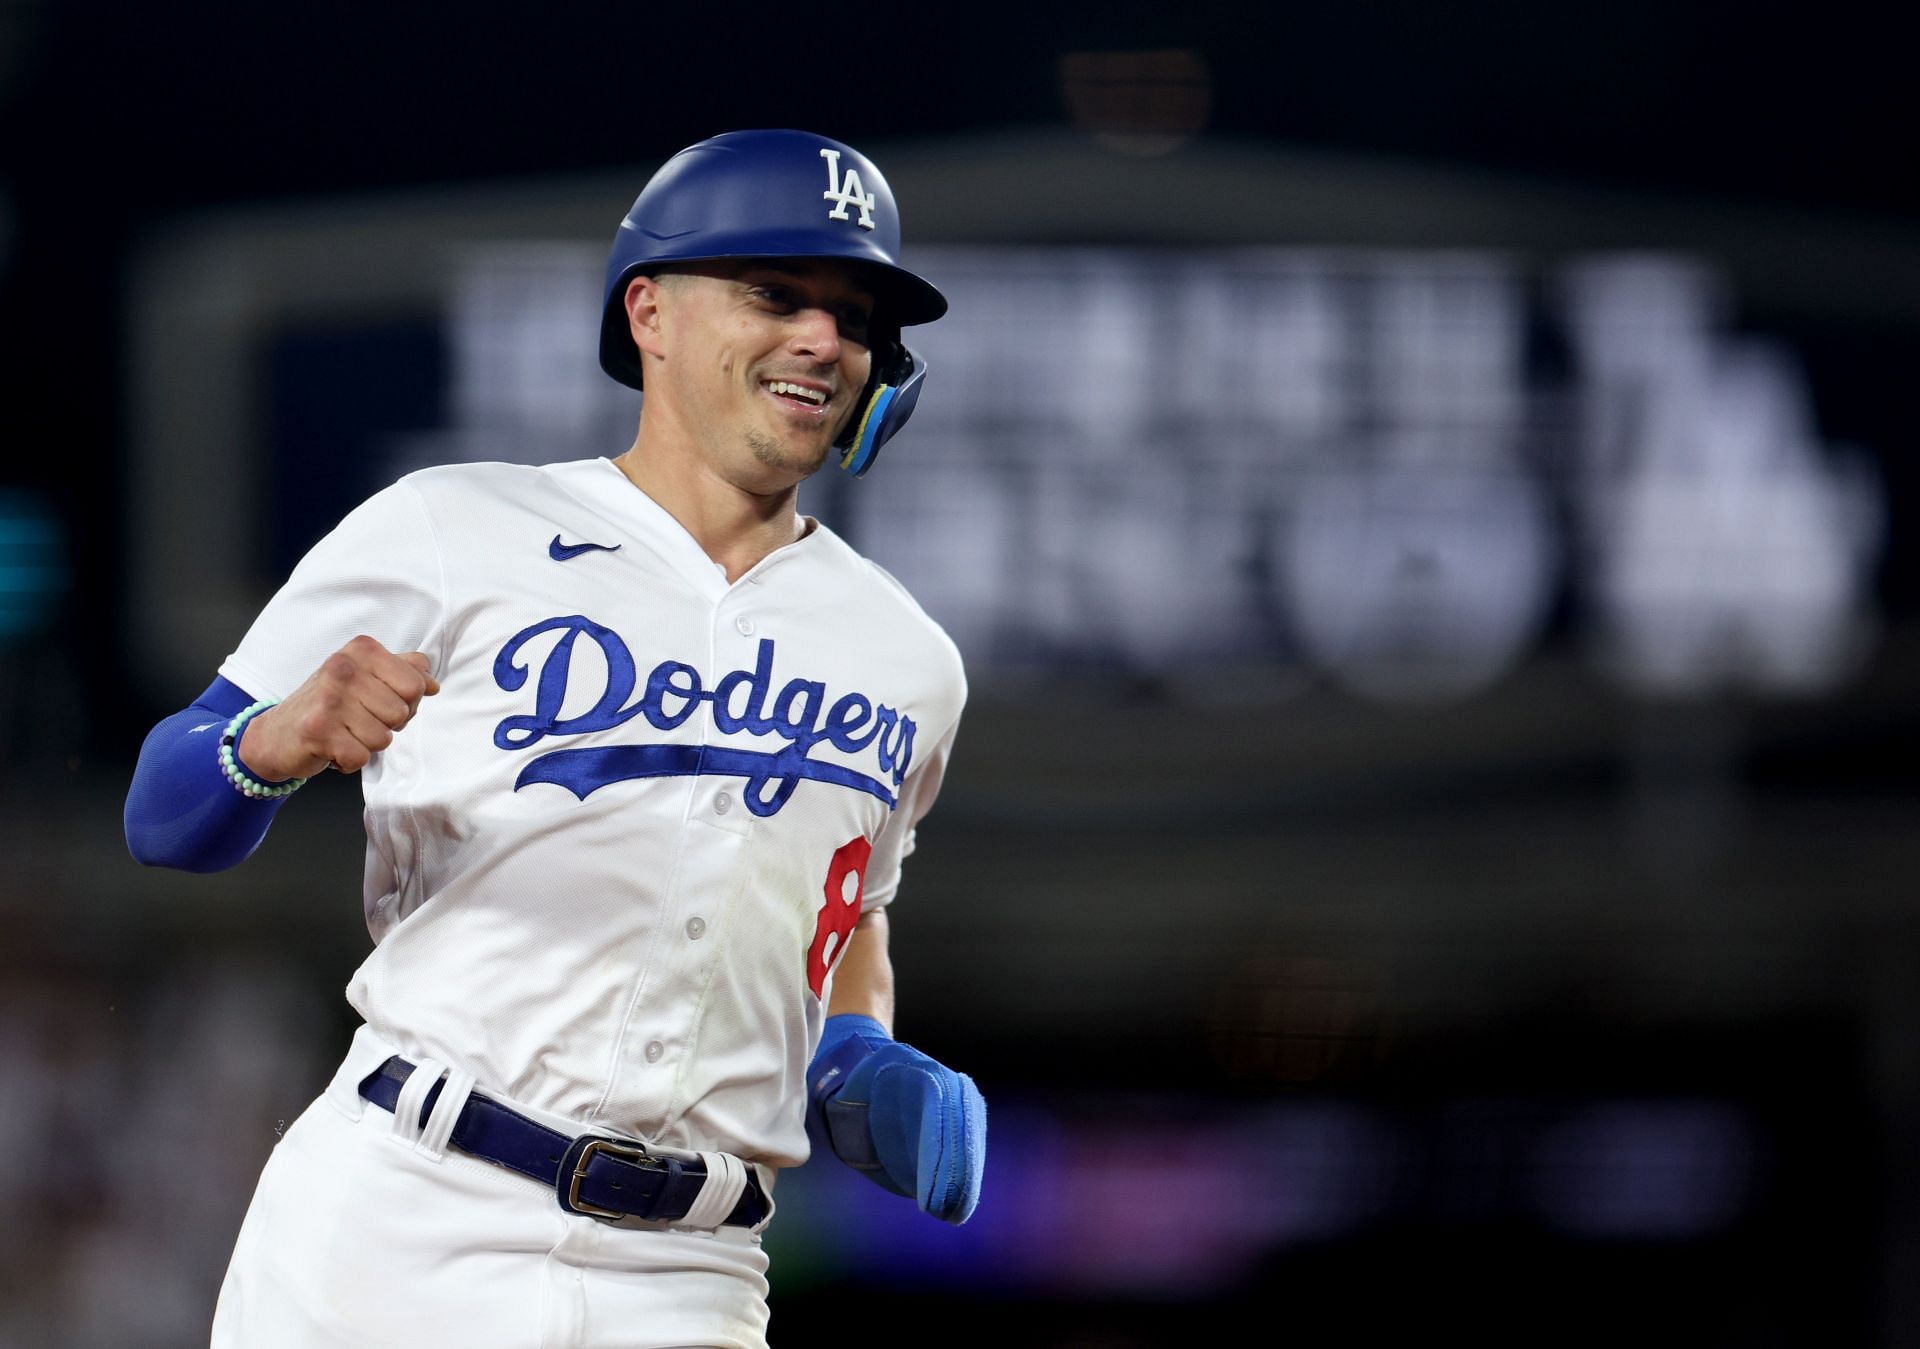 With the signing of new players like Teoscar Hernandez and Manuel Margot, it does not seem like Kike Hernandez will reunite with the LA Dodgers.